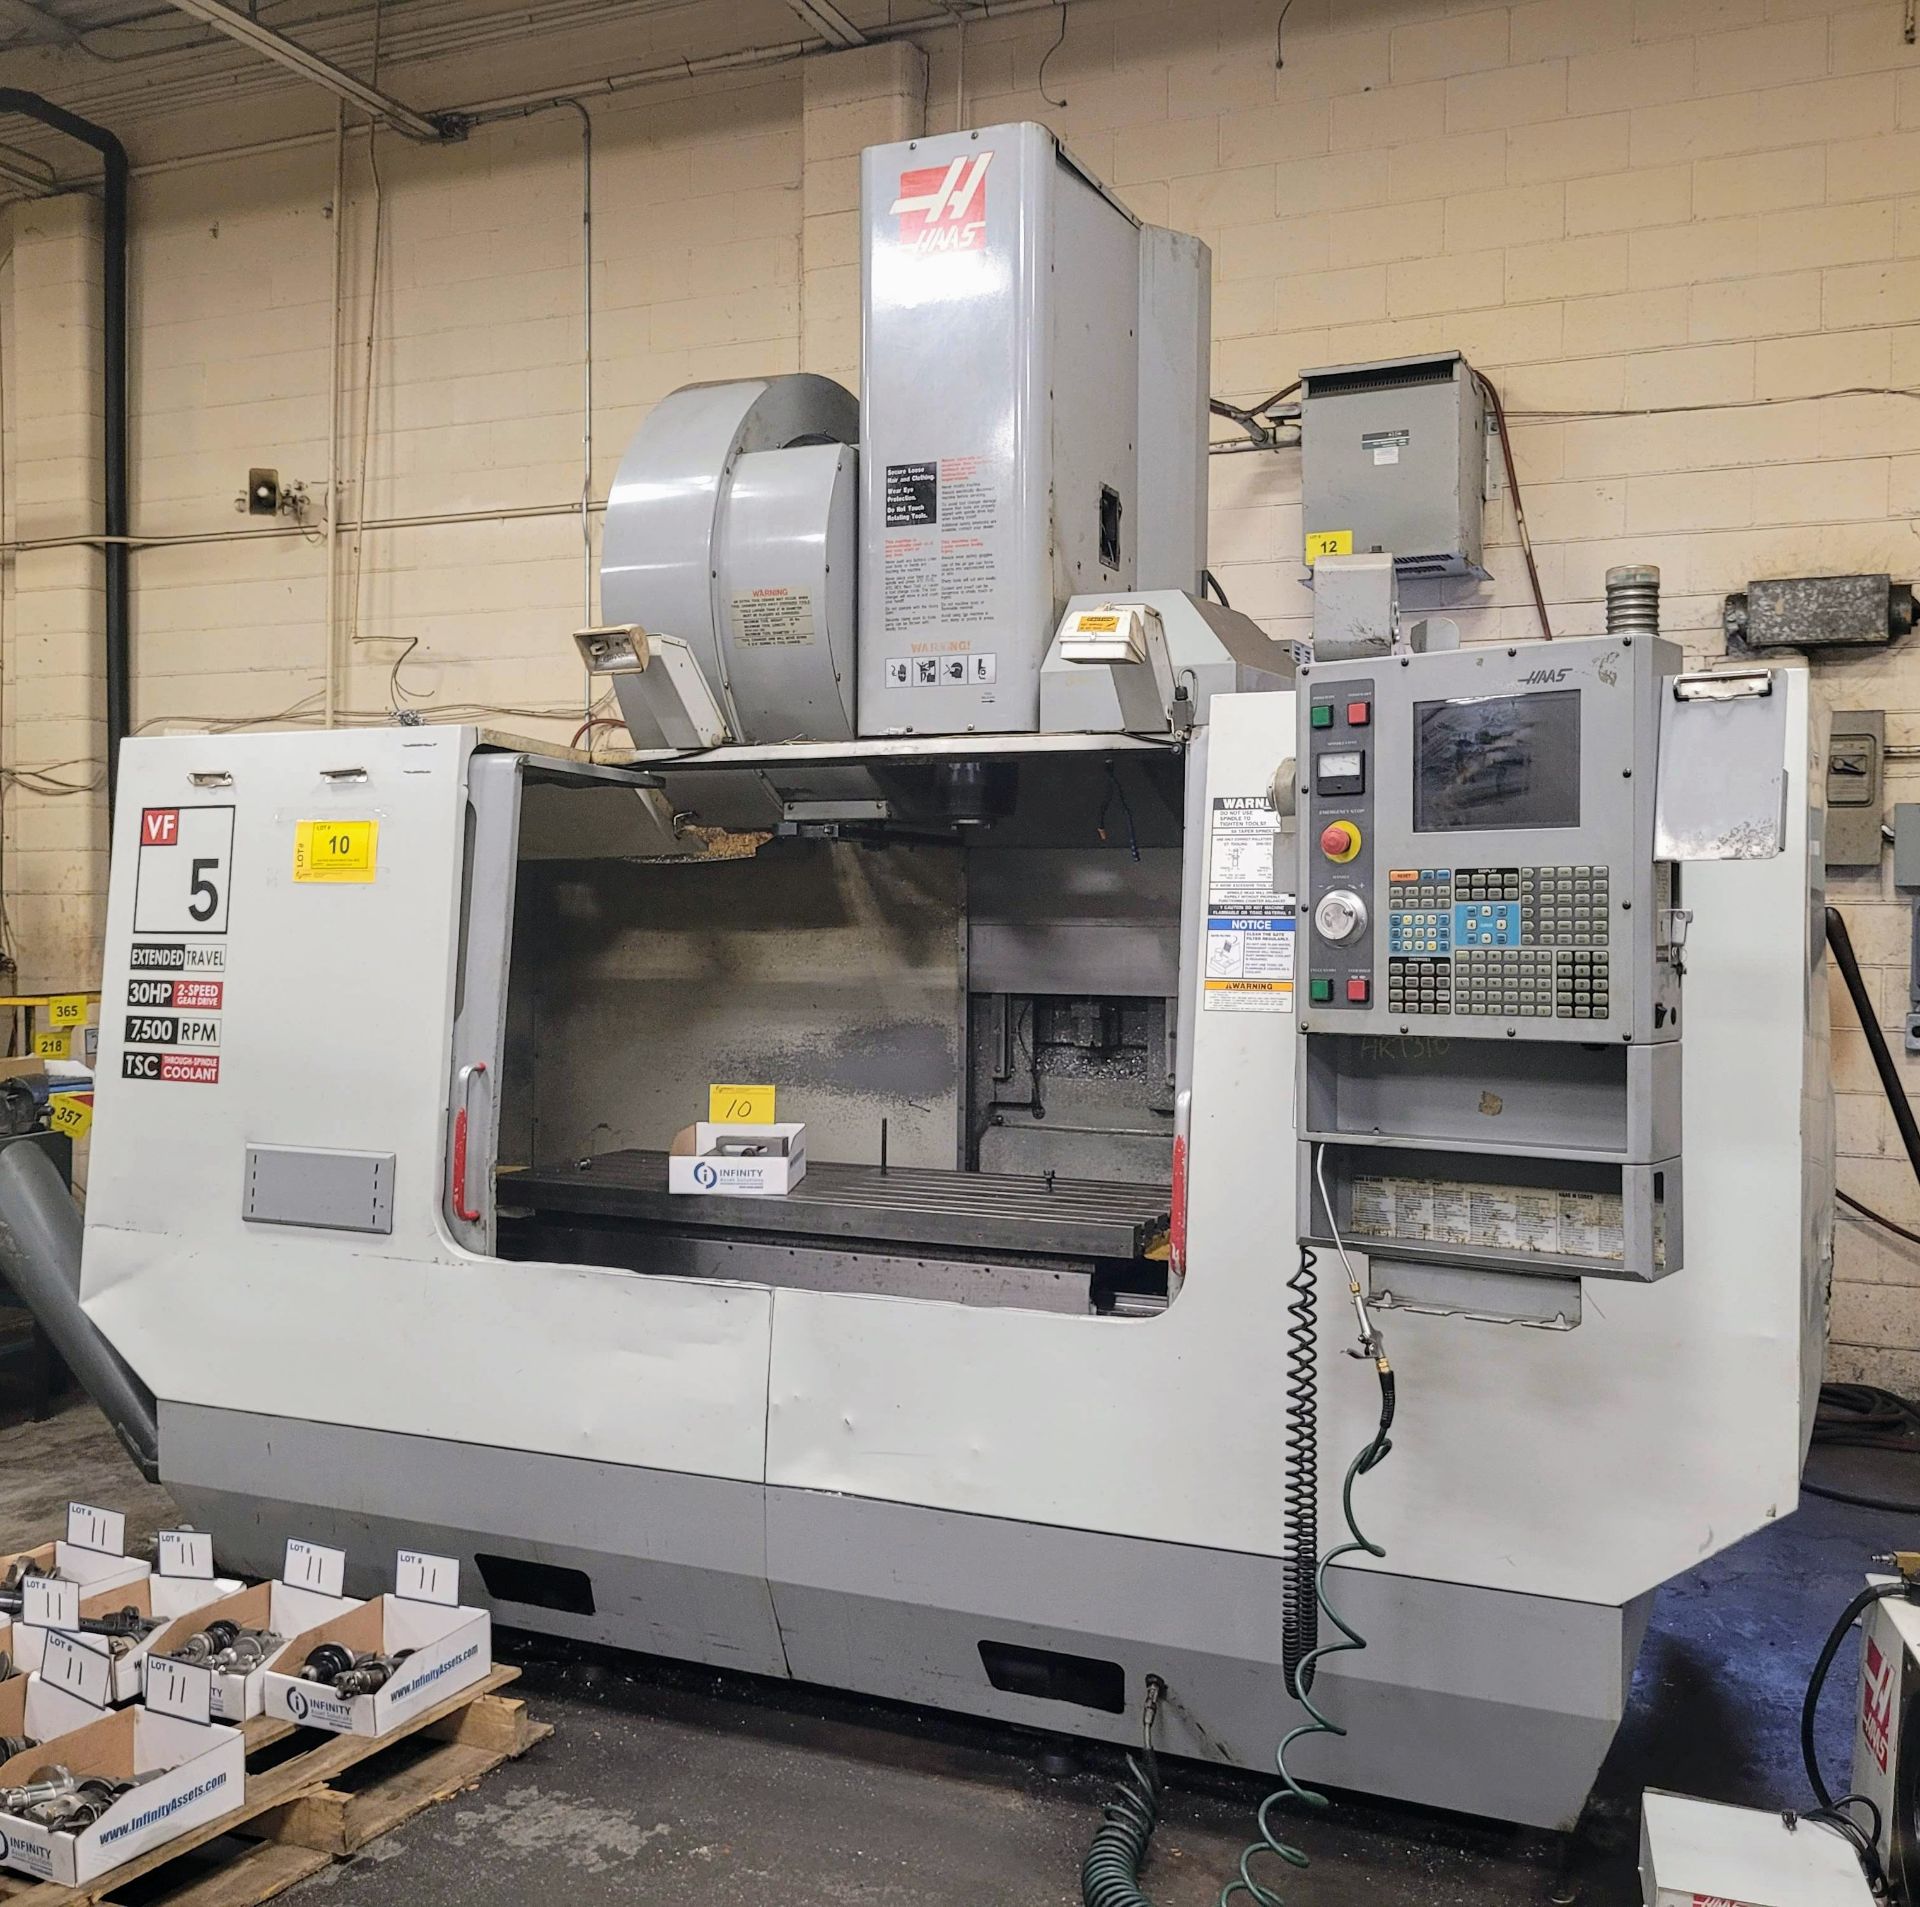 2004 HAAS VF-5/50XT CNC VERTICAL MACHINING CENTER, CNC CONTROL, TRAVELS: X-60”, Y-26”, Z-25”, CAT50, - Image 15 of 16